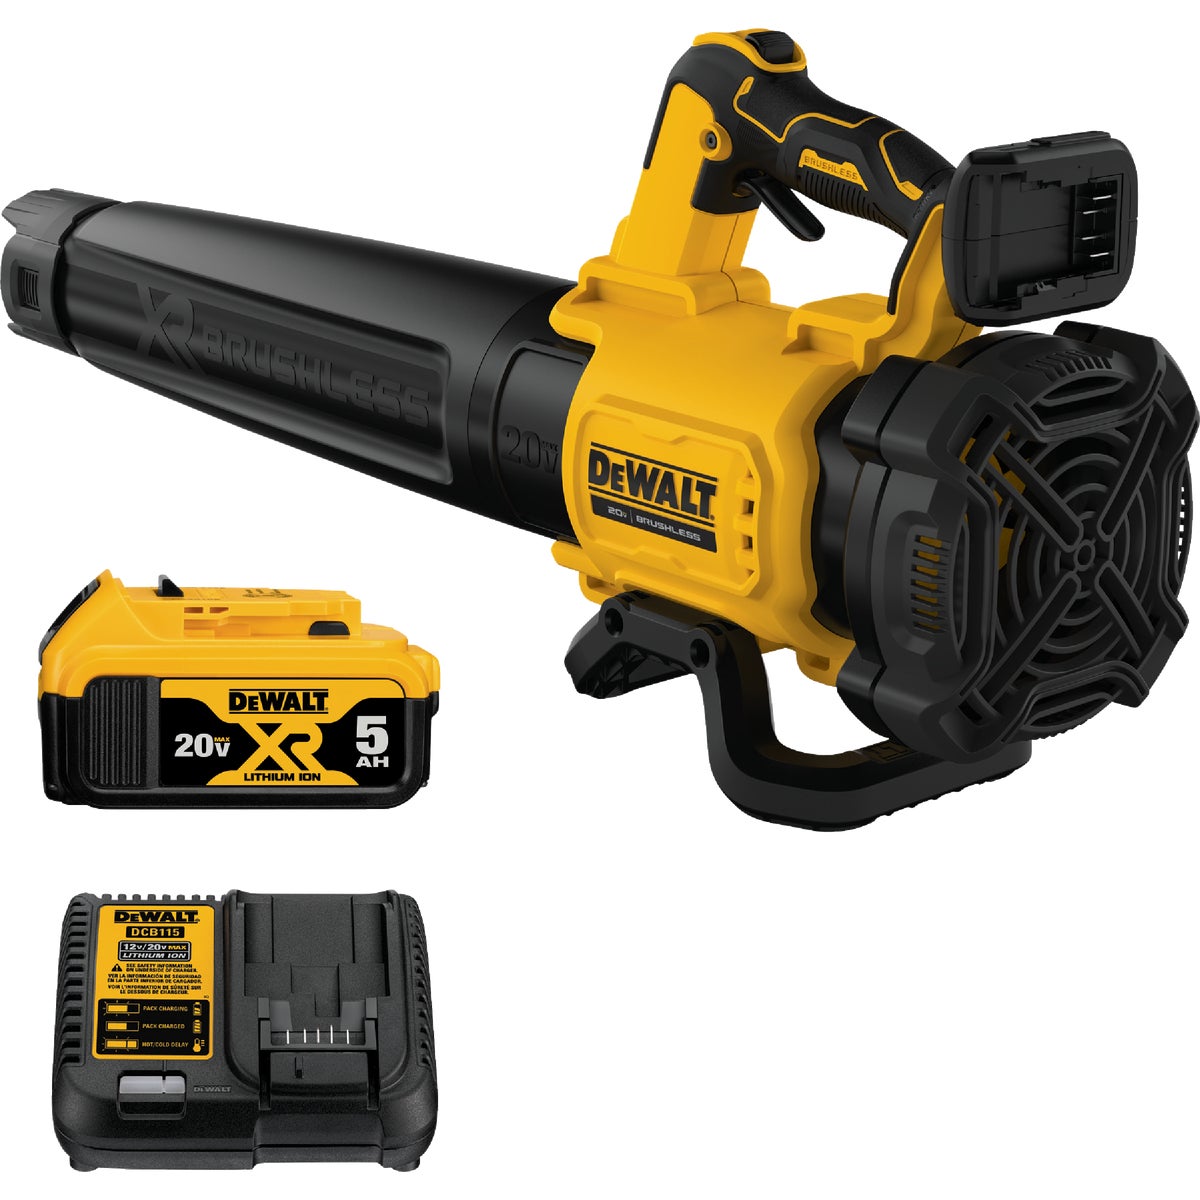 Item 704354, The 20V MAX Brushless Handheld Blower provides the ability to clear debris 